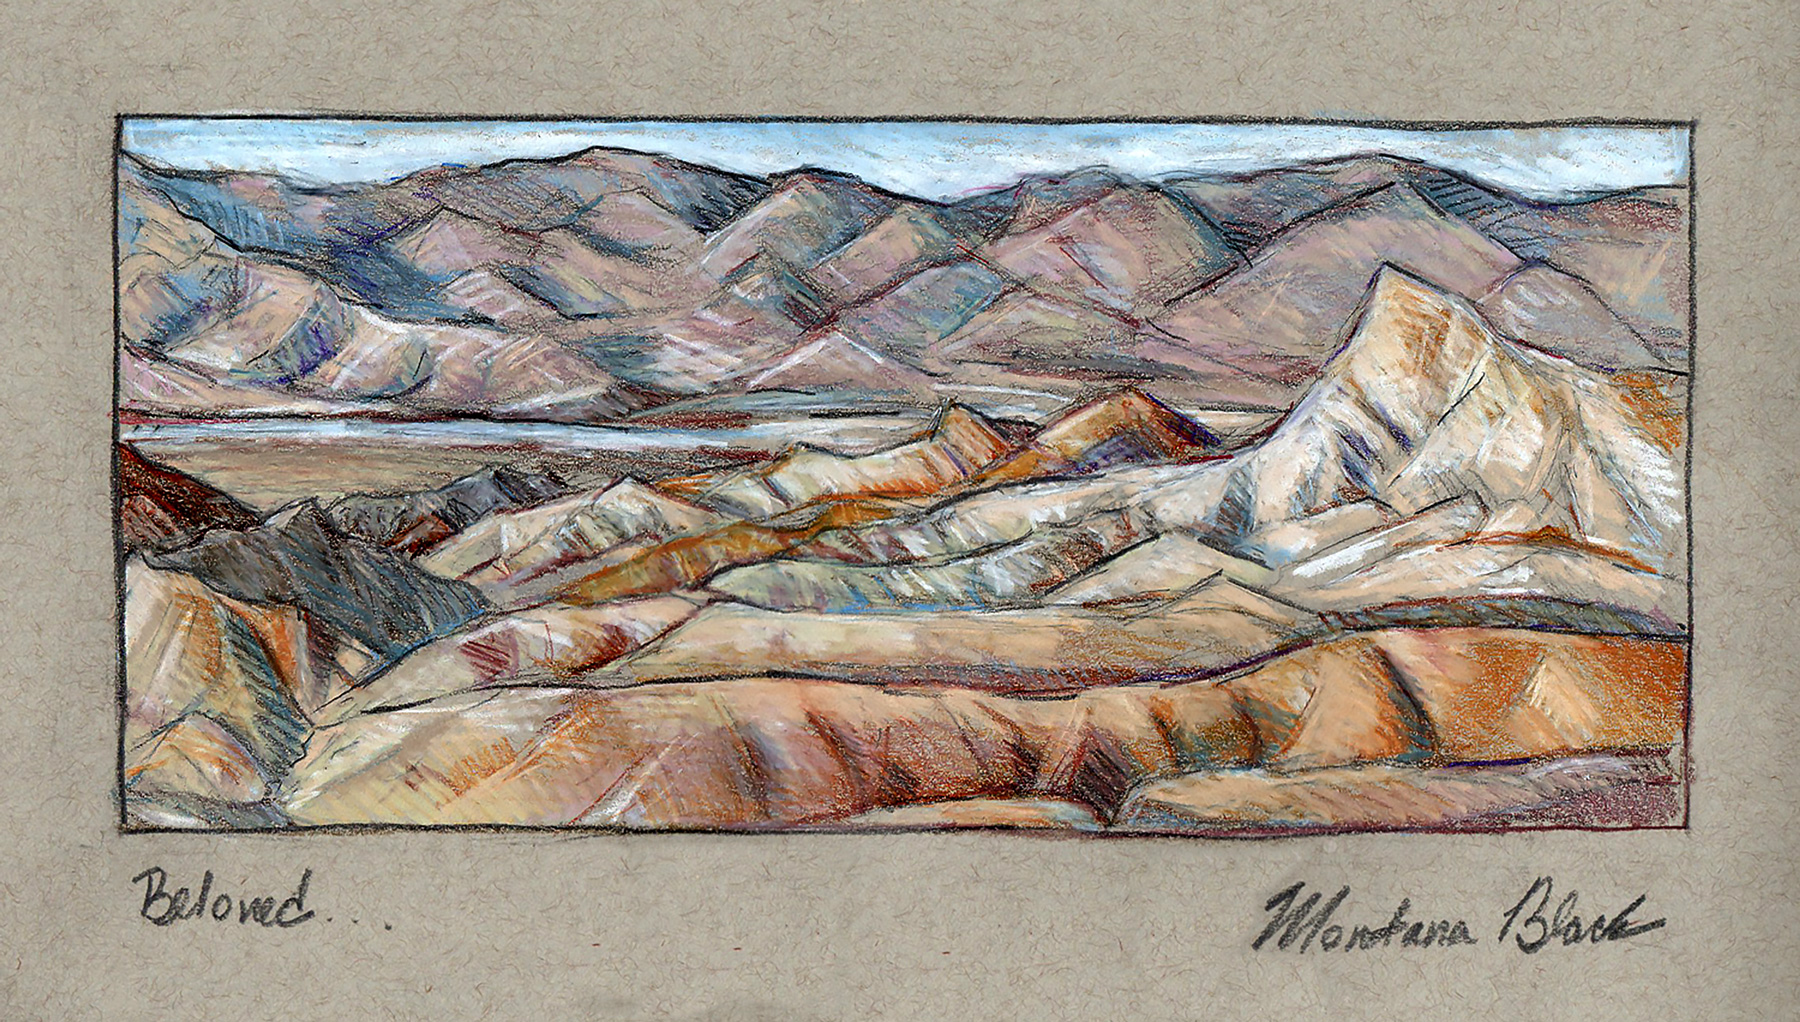 Color pencil drawing of Zabriskie Point in Death Valley National Park.